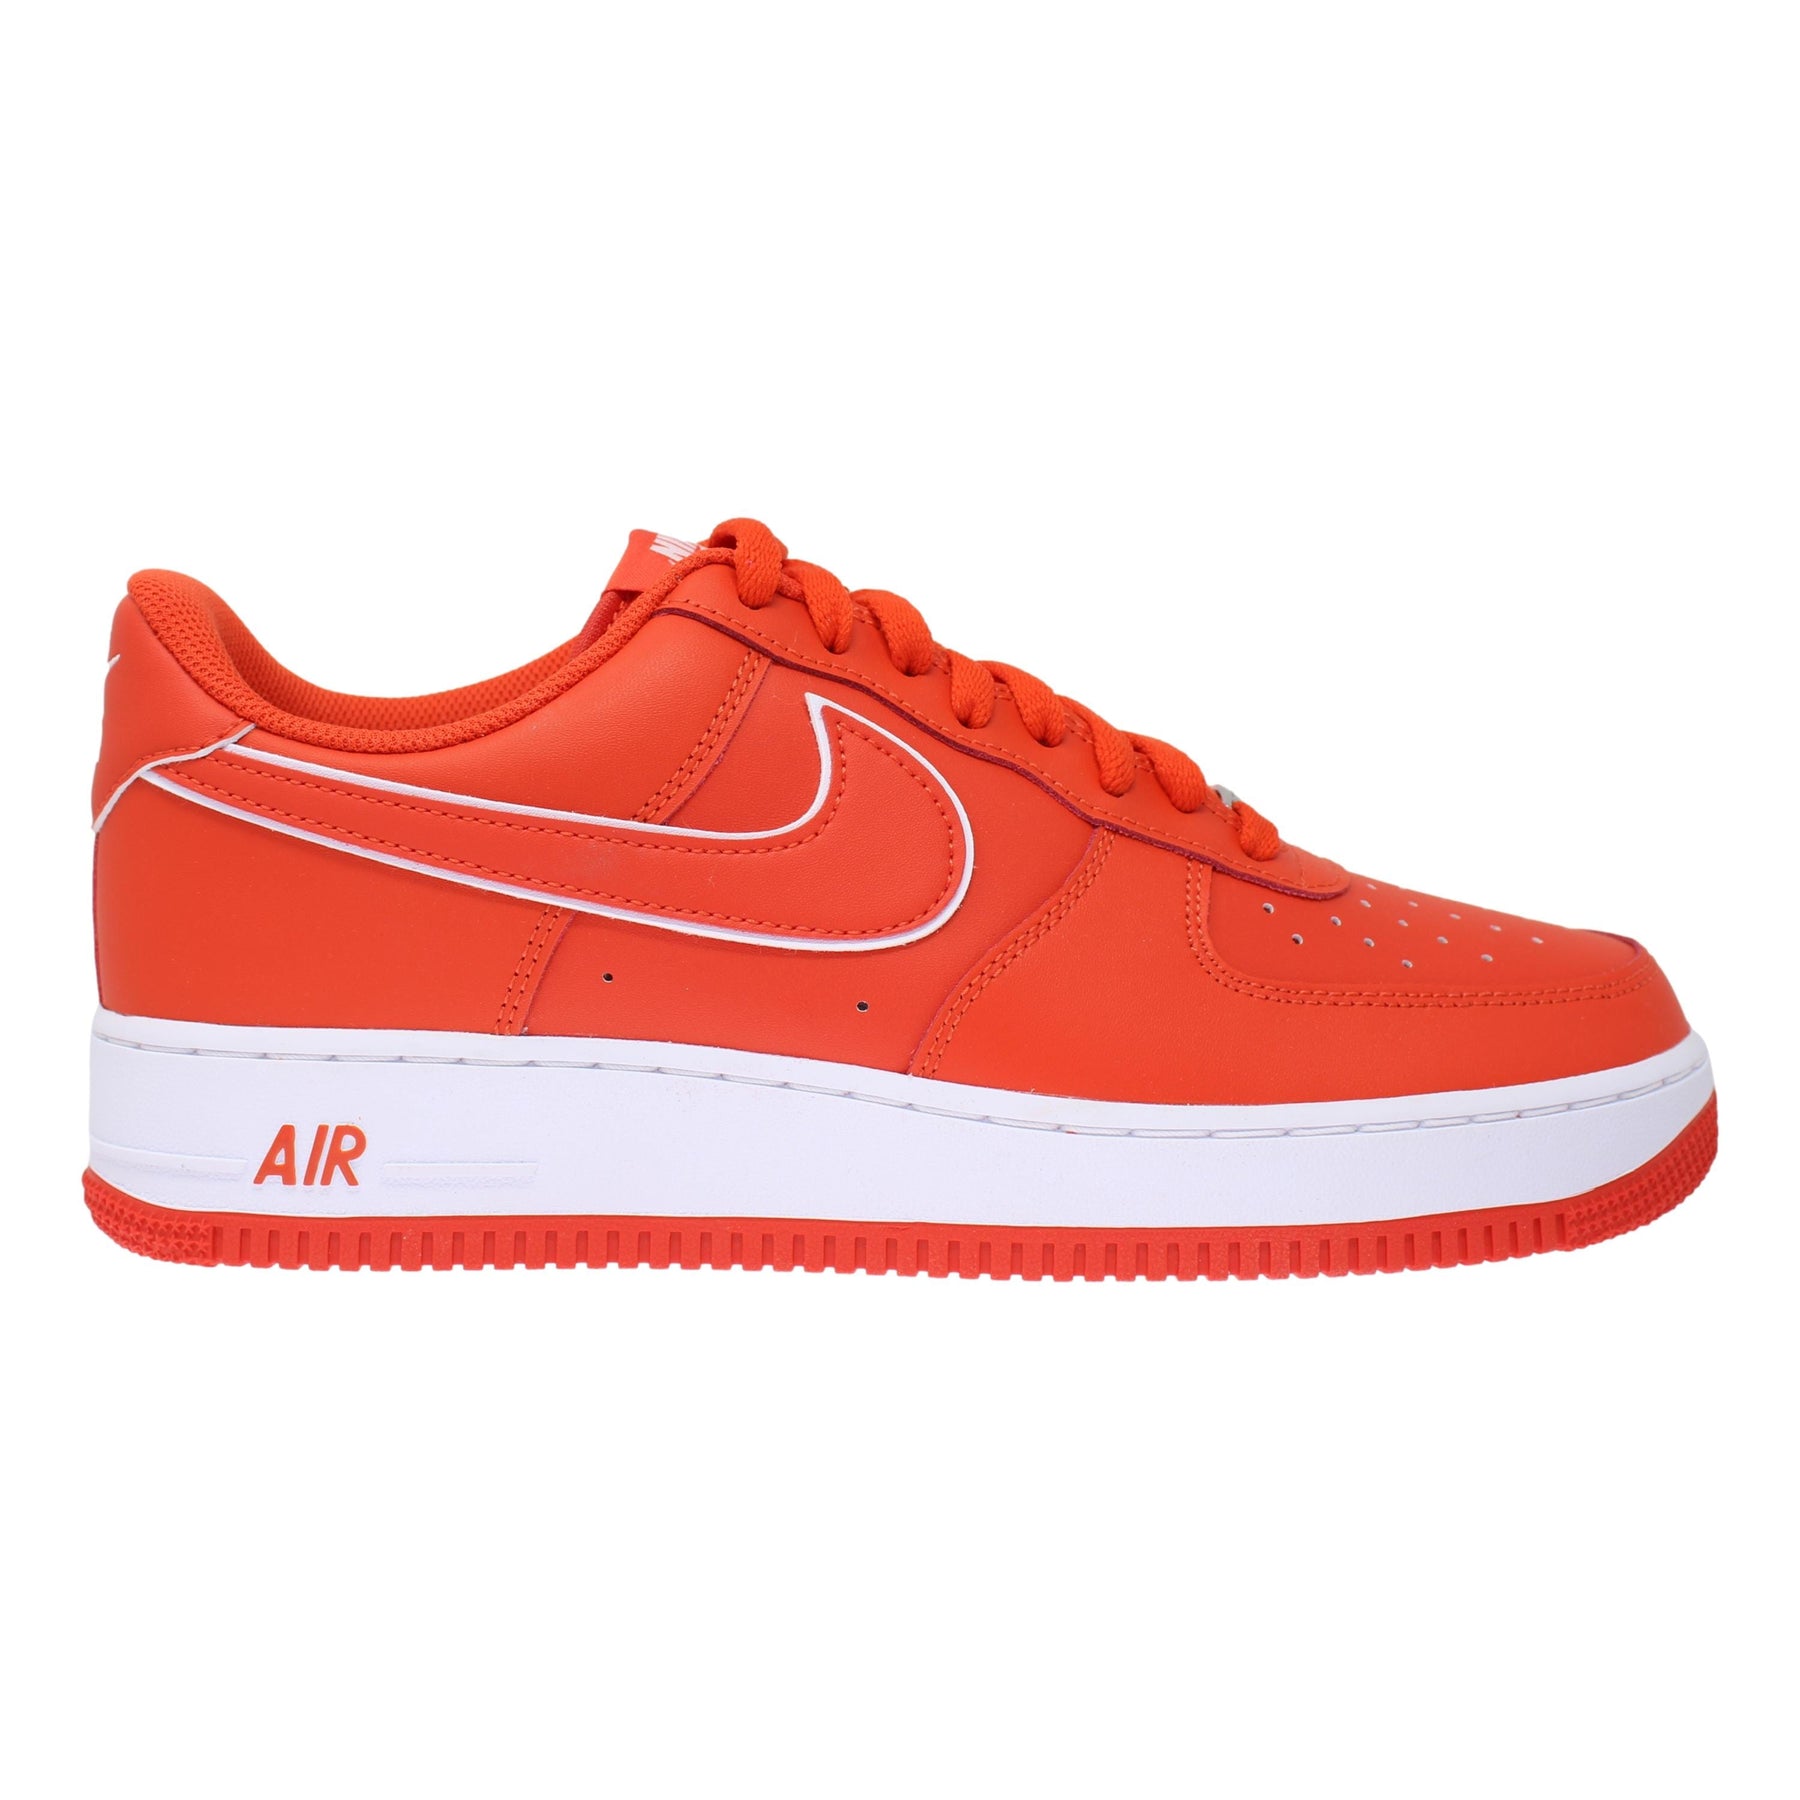 Nike Air Force 1 LV8 2 GS (Pale Ivory/White/Picante Red